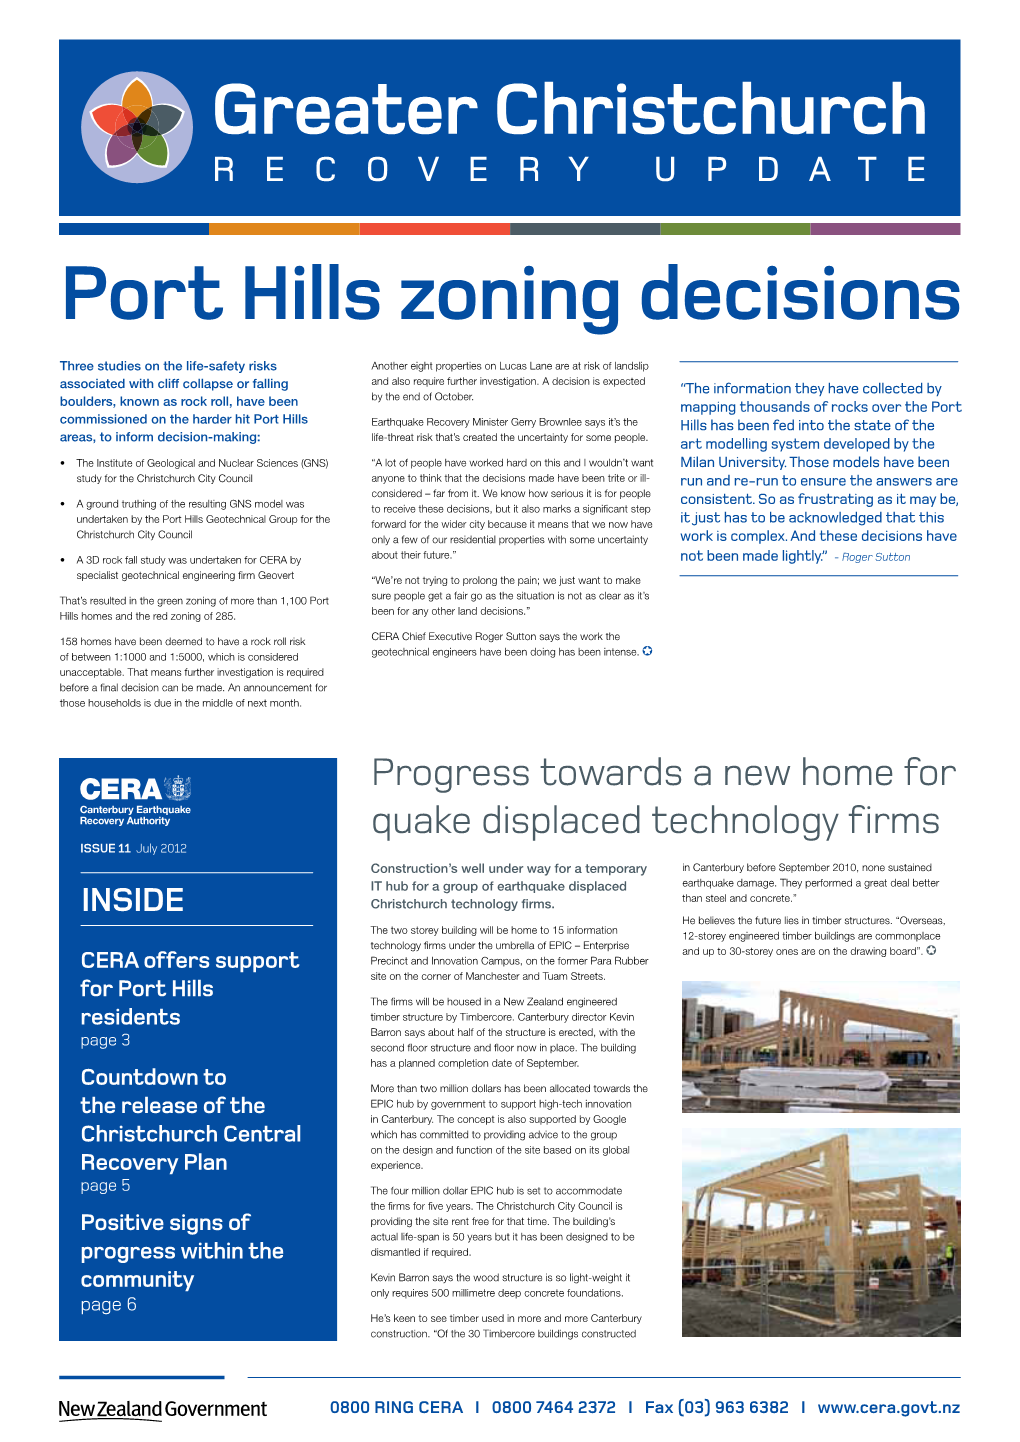 Greater Christchurch RECOVERY UPDATE Port Hills Zoning Decisions